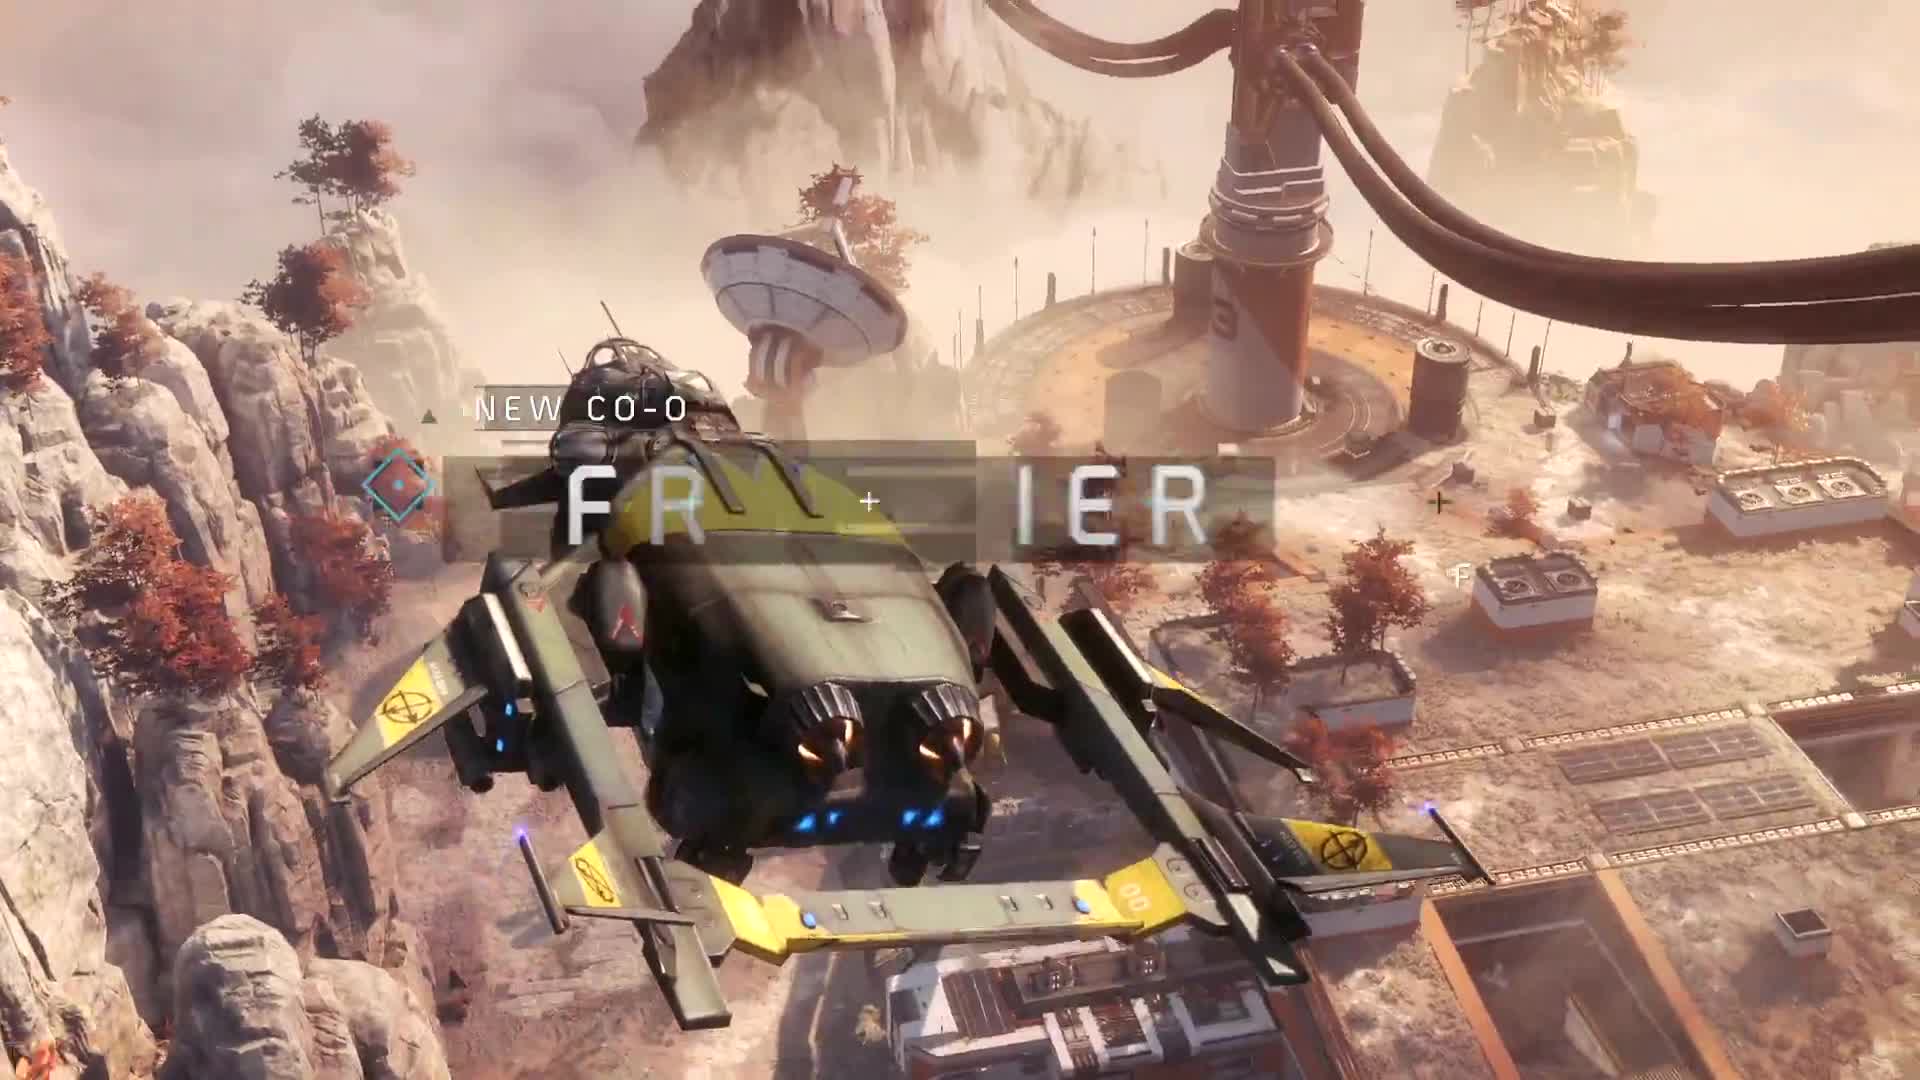 Titanfall 2 - Operation Frontier Shield - gameplay trailer